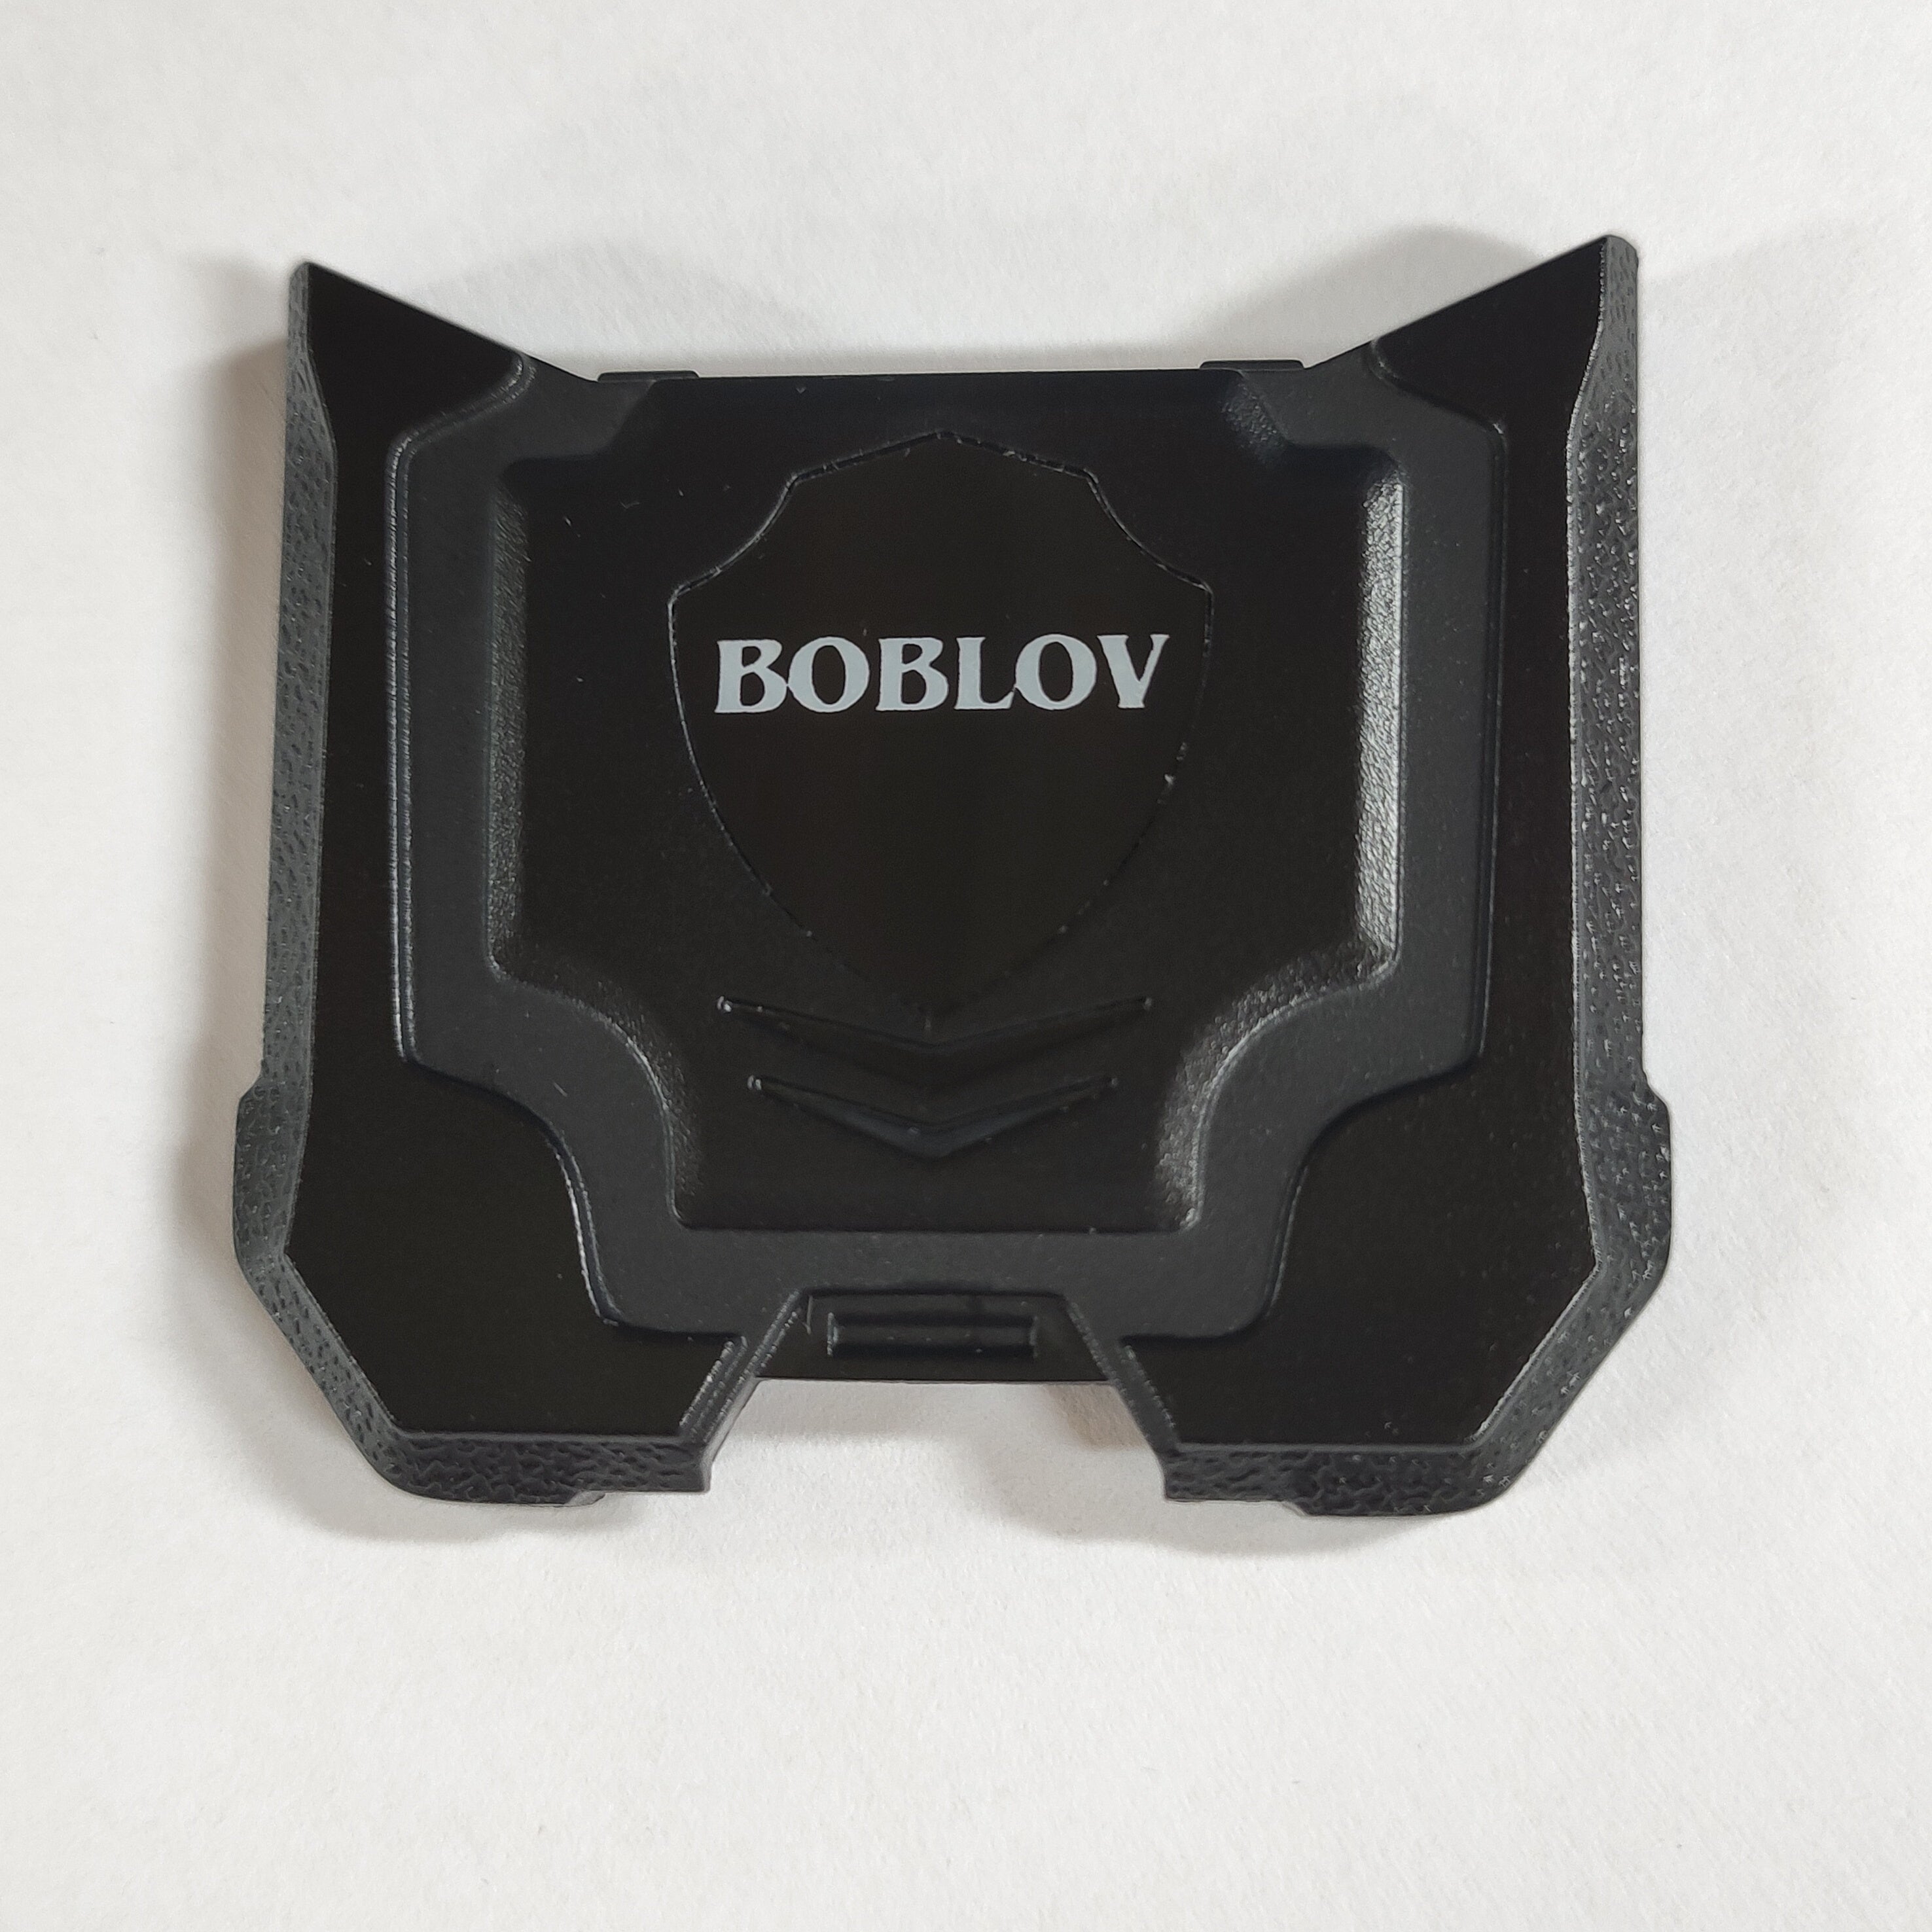 BOBLOV T5 Battery Cover, ONLY Contains ONE Battery Cover for T5 Body Camera, Can't be Used Other Model and Brands(Camera Not Included)